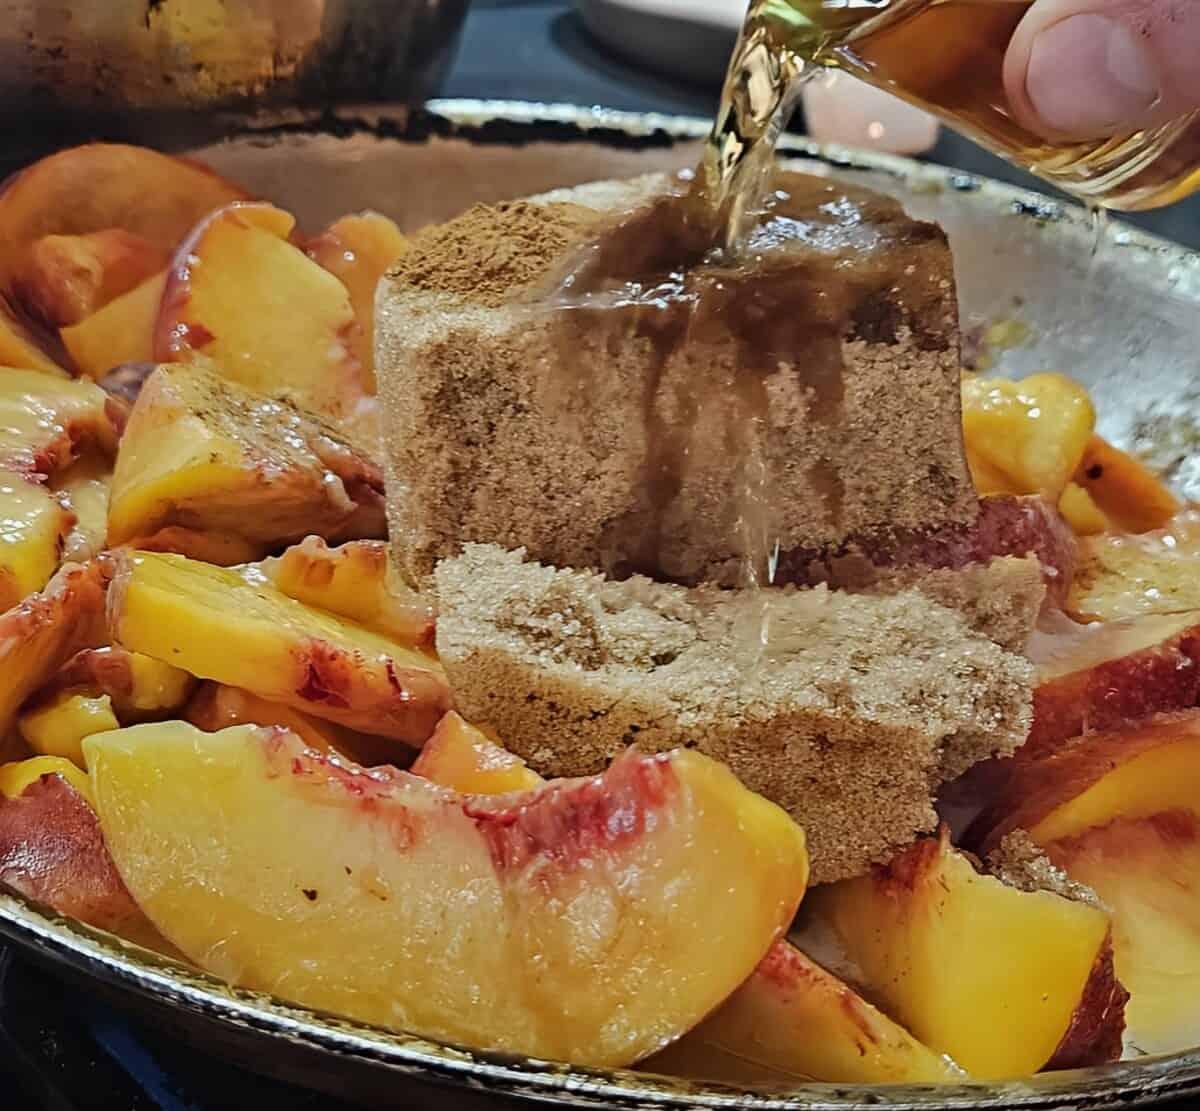 peaches, brown sugar, and cinnamon in pan, bourbon being poured in.